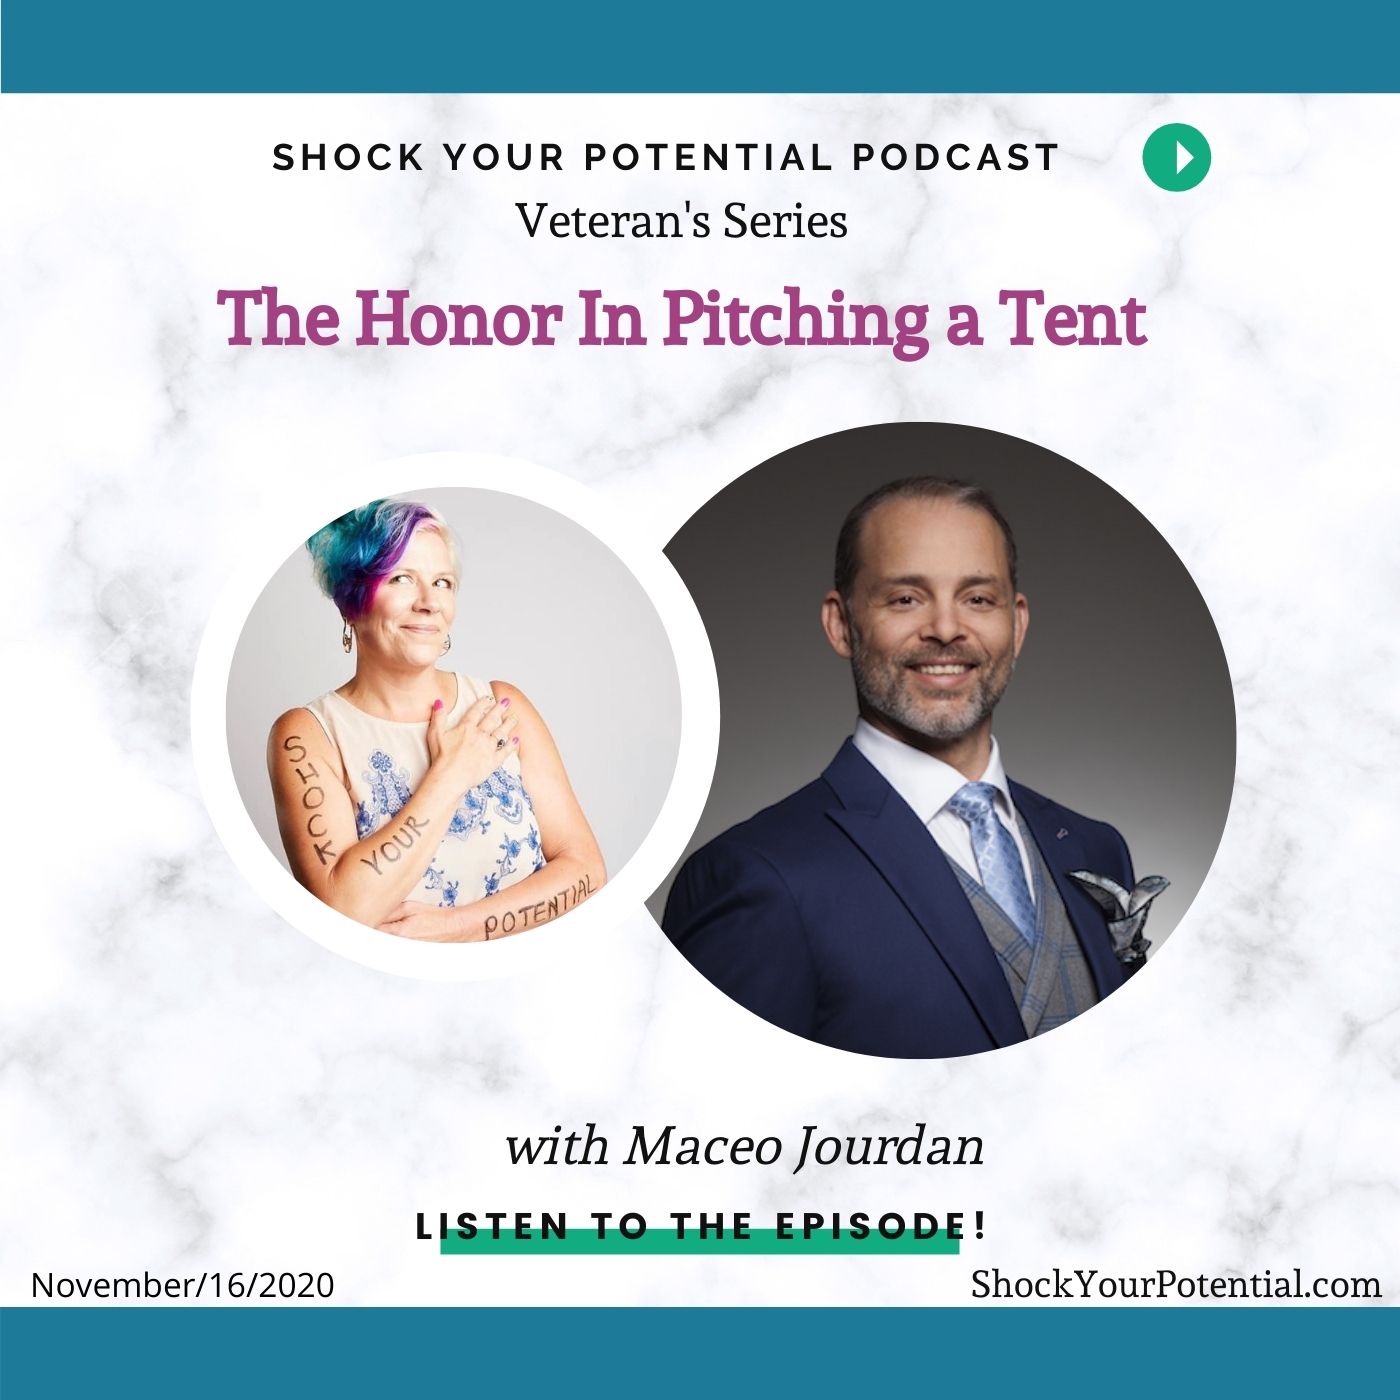 The Honor In Pitching a Tent – Maceo Jourdan